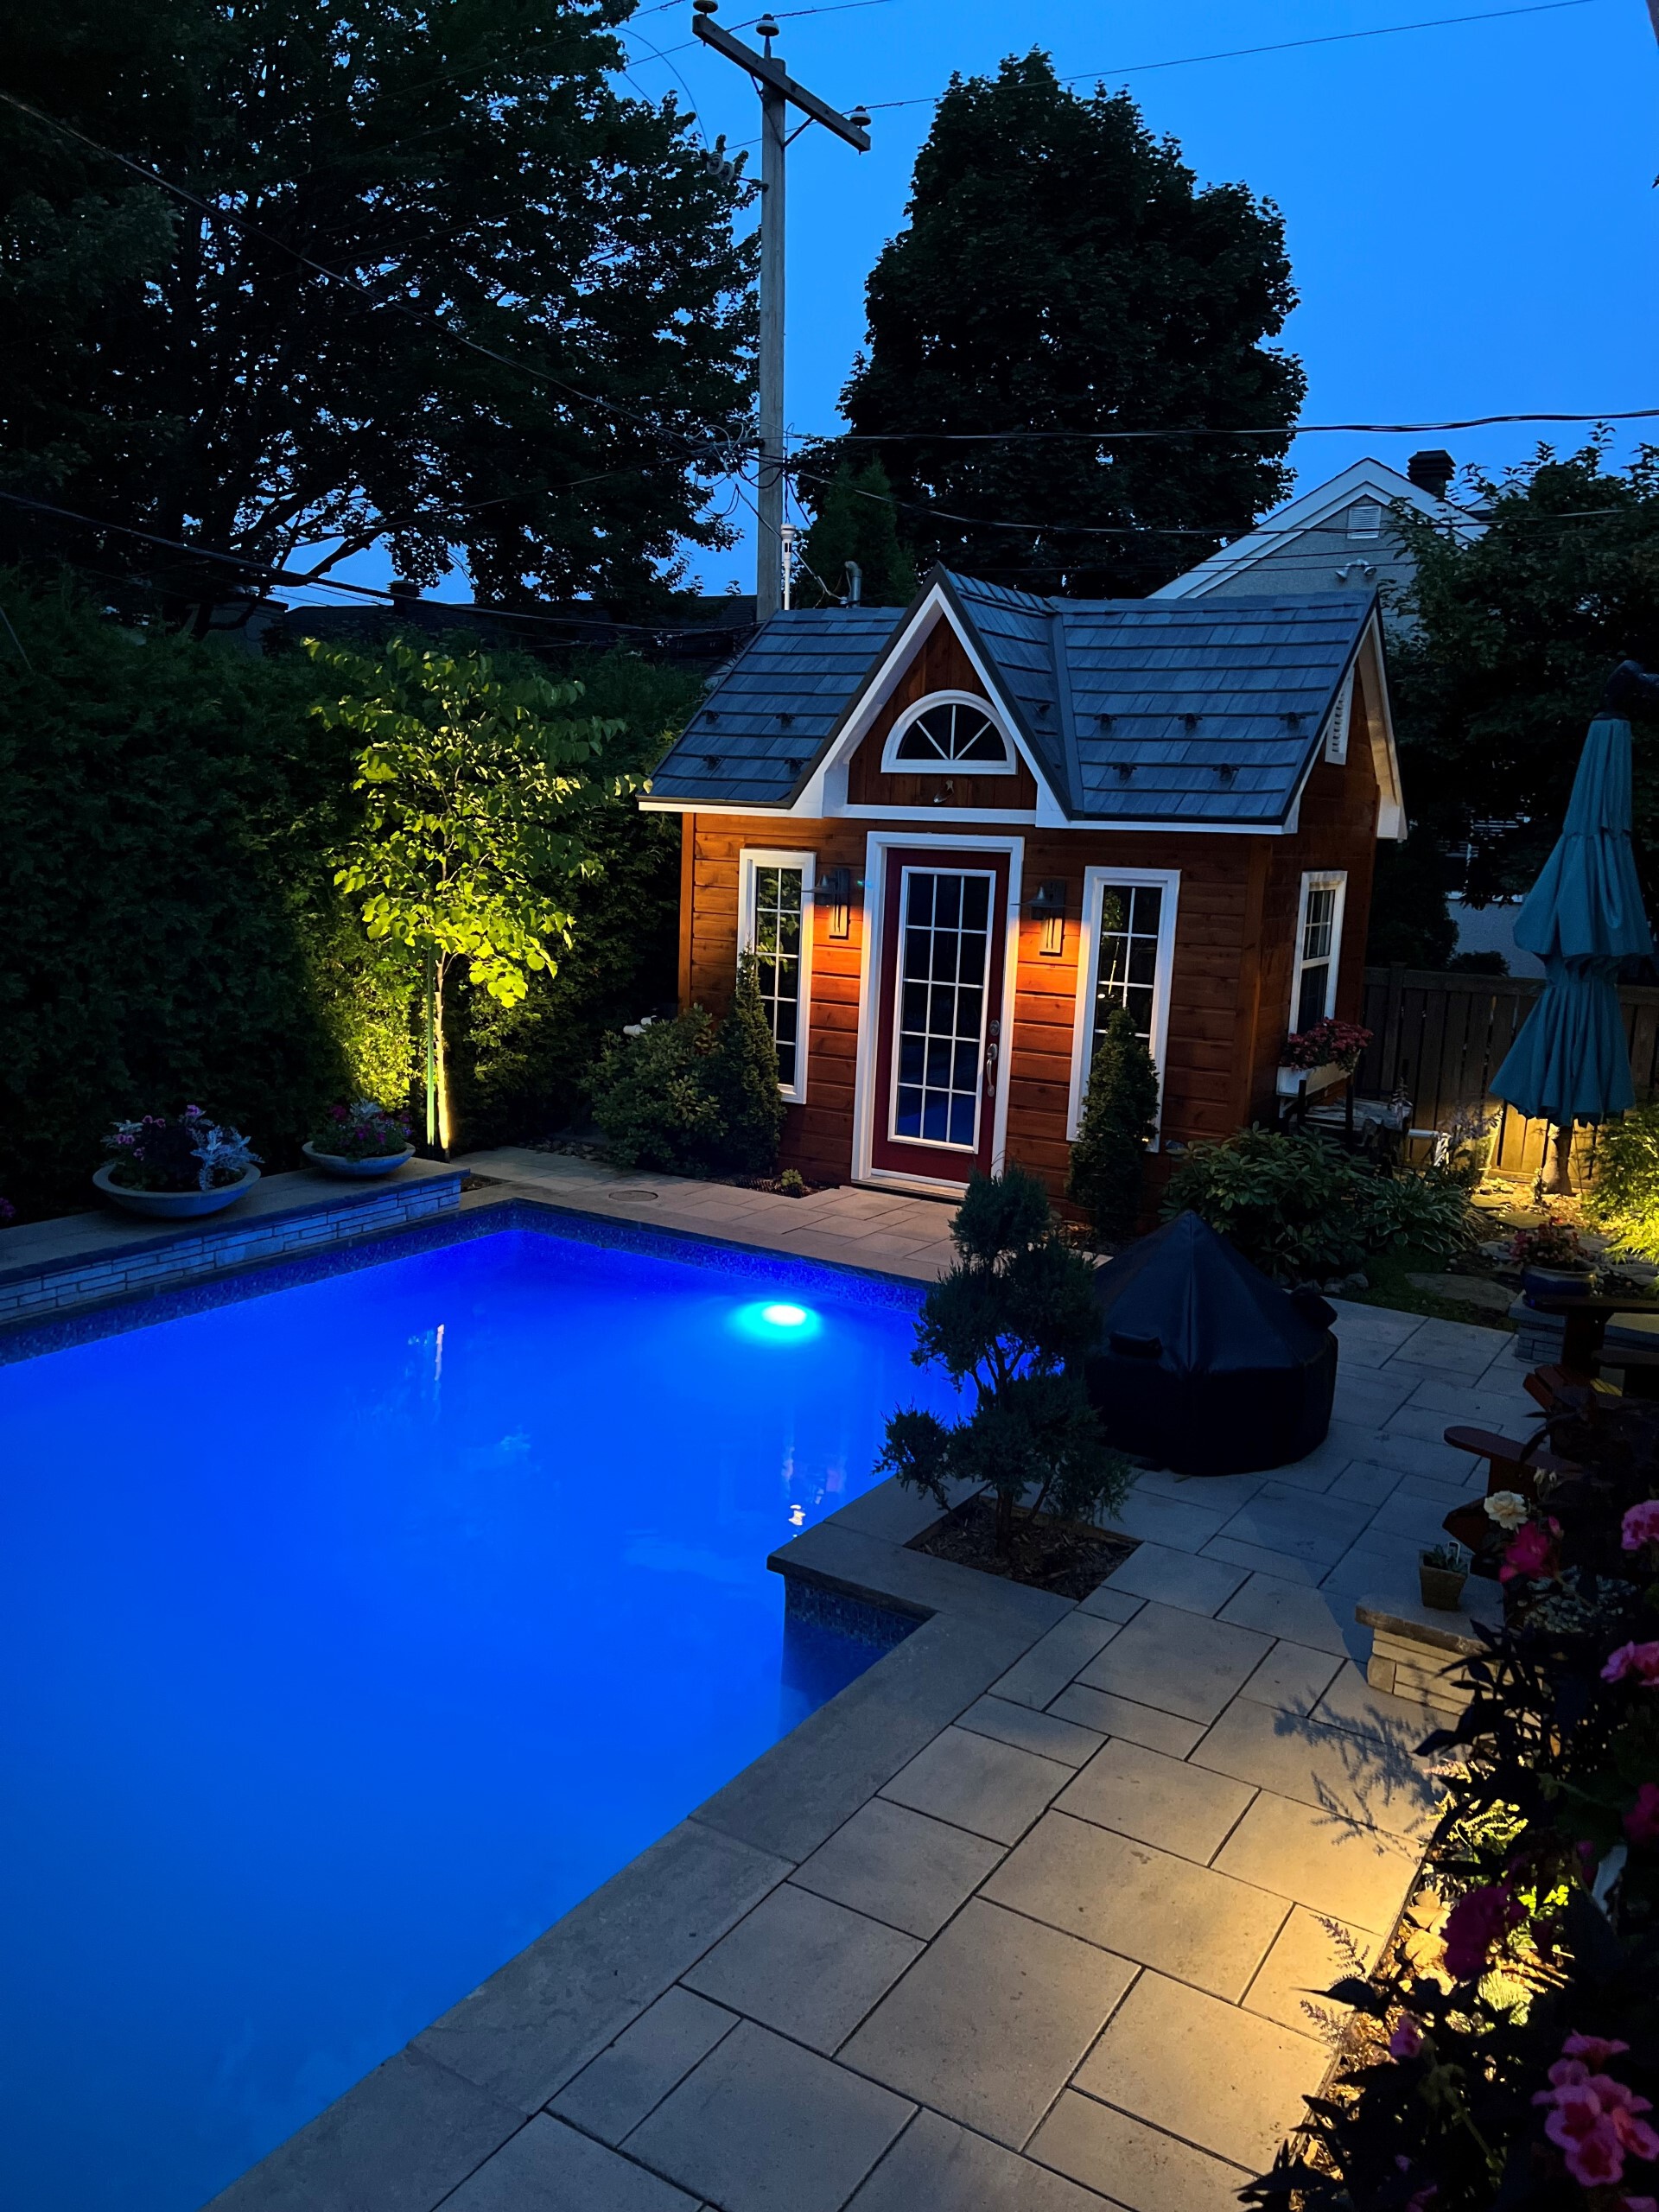 Front view of 8' x 12' Copper Creek Pool House located in Terrebonne, Quebec - Summerwood Products 